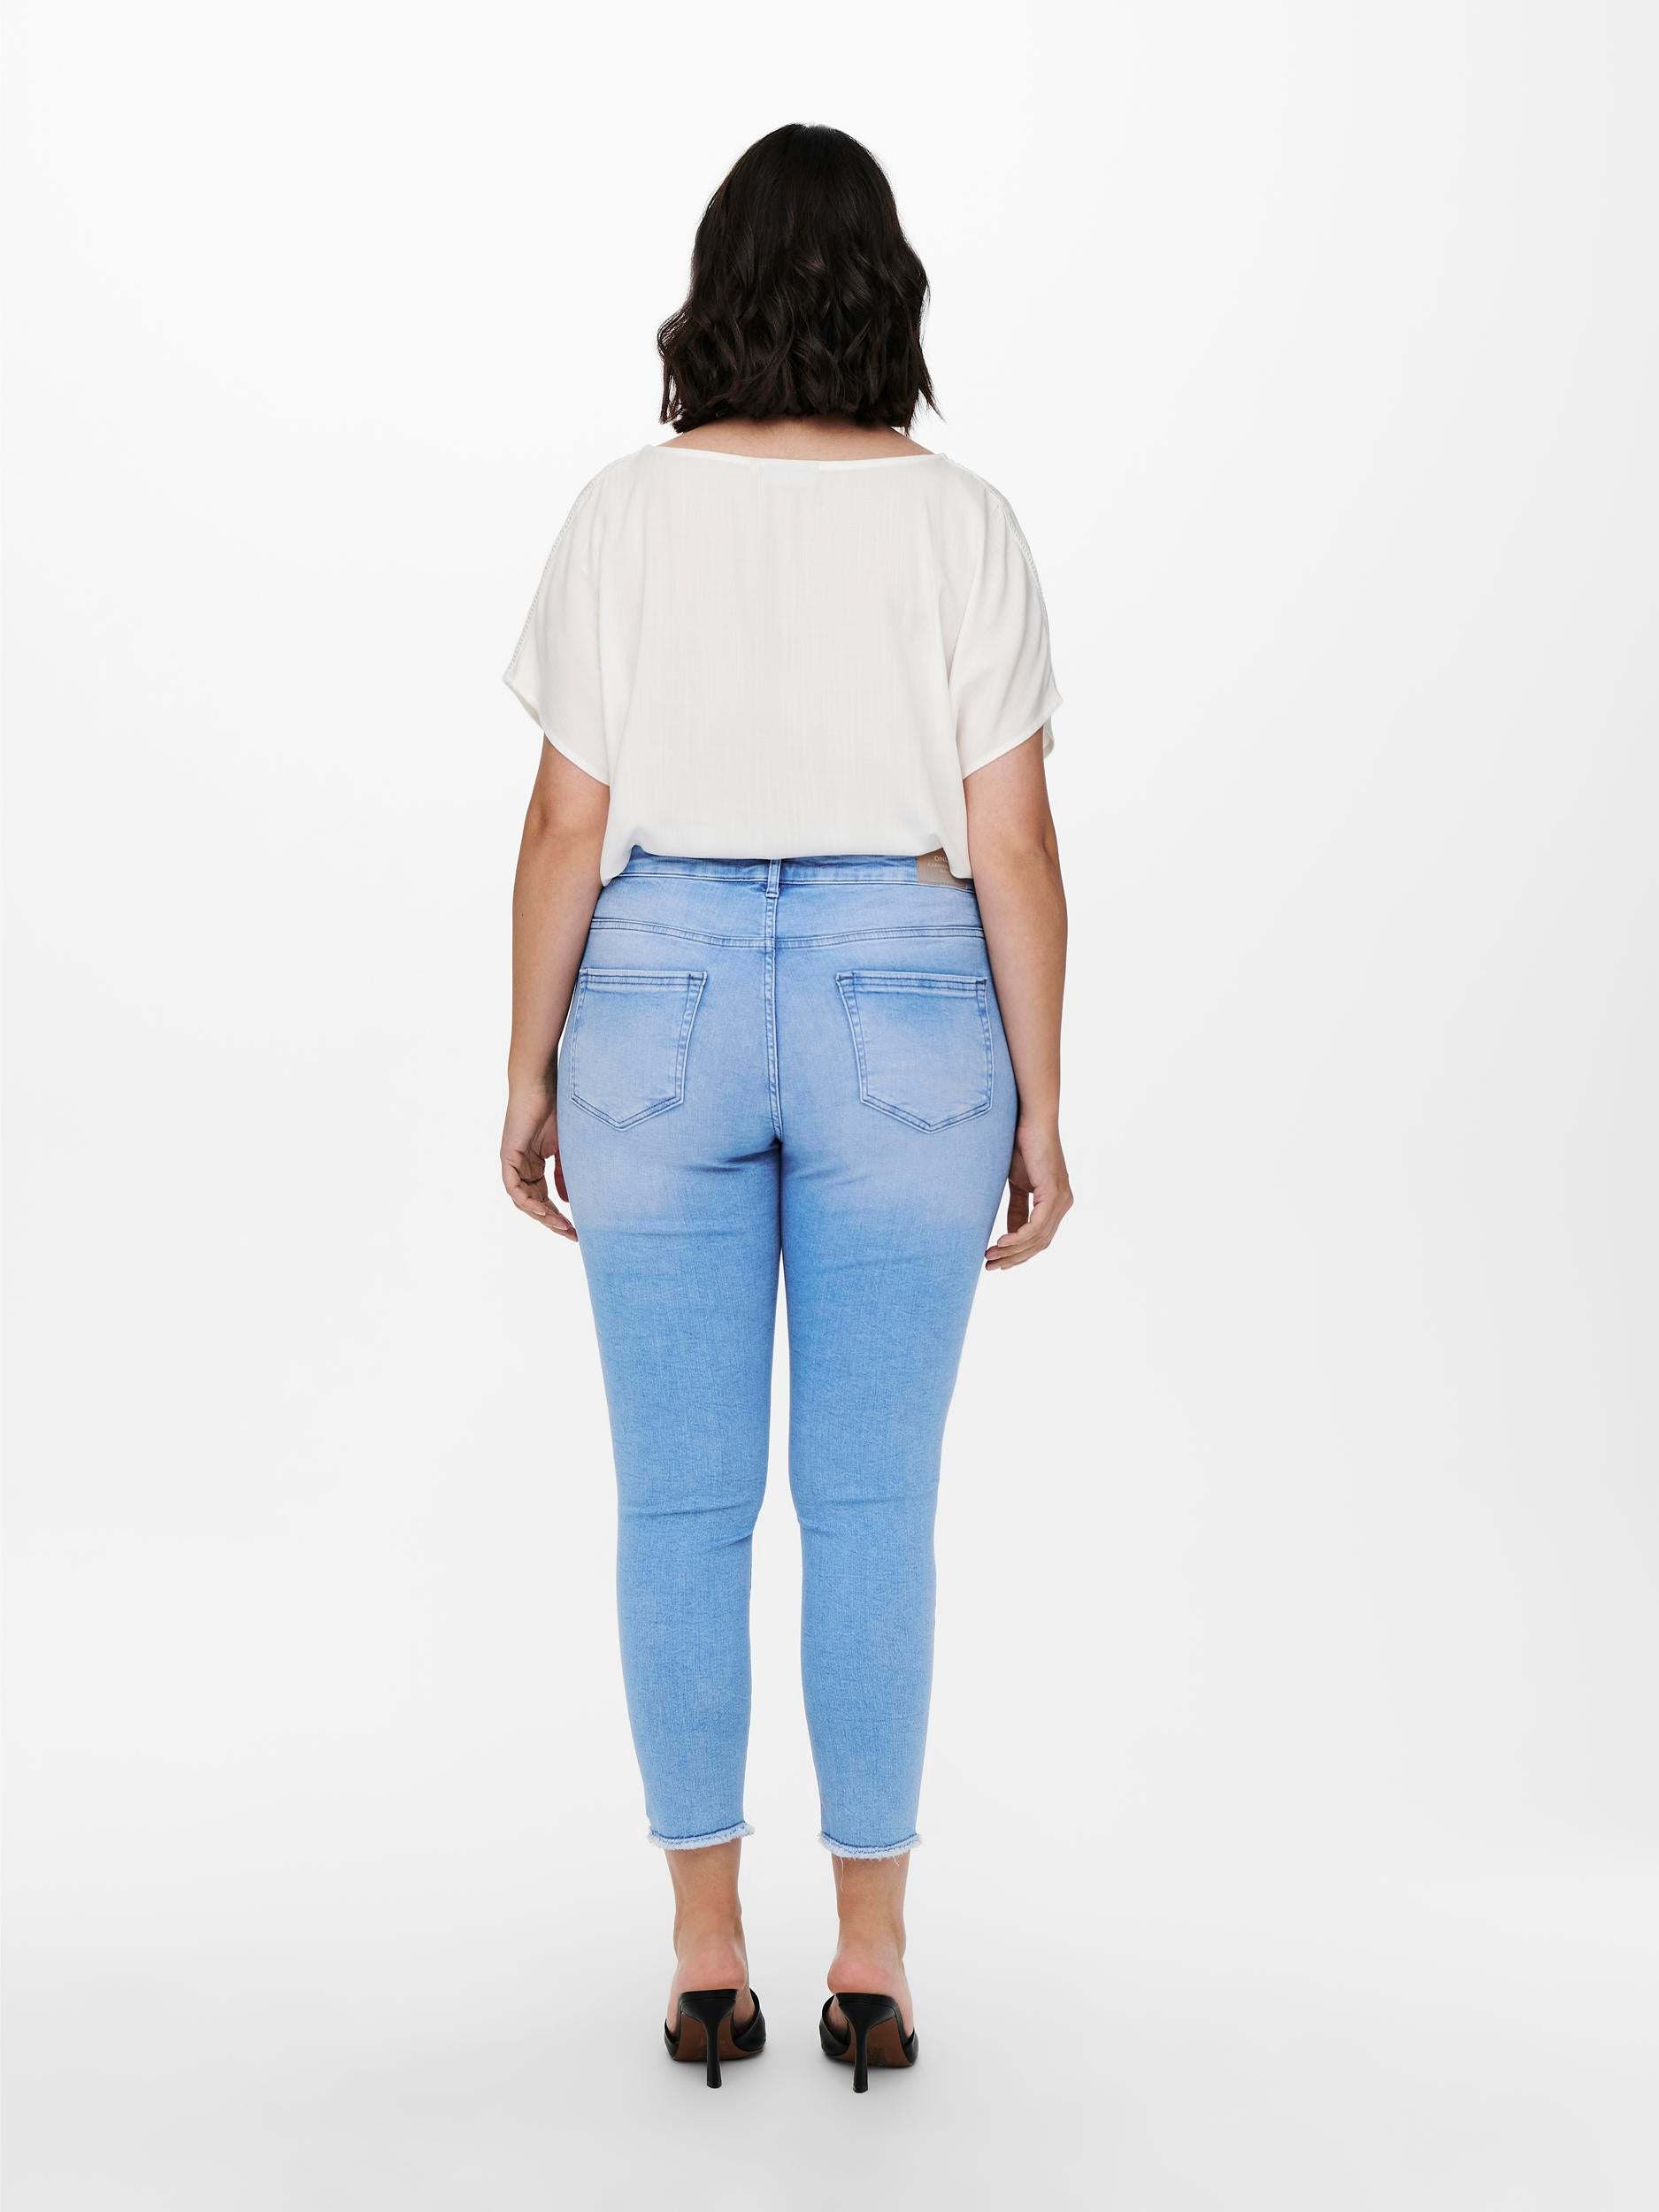 CARWILLY JEANS ANK - NOOS